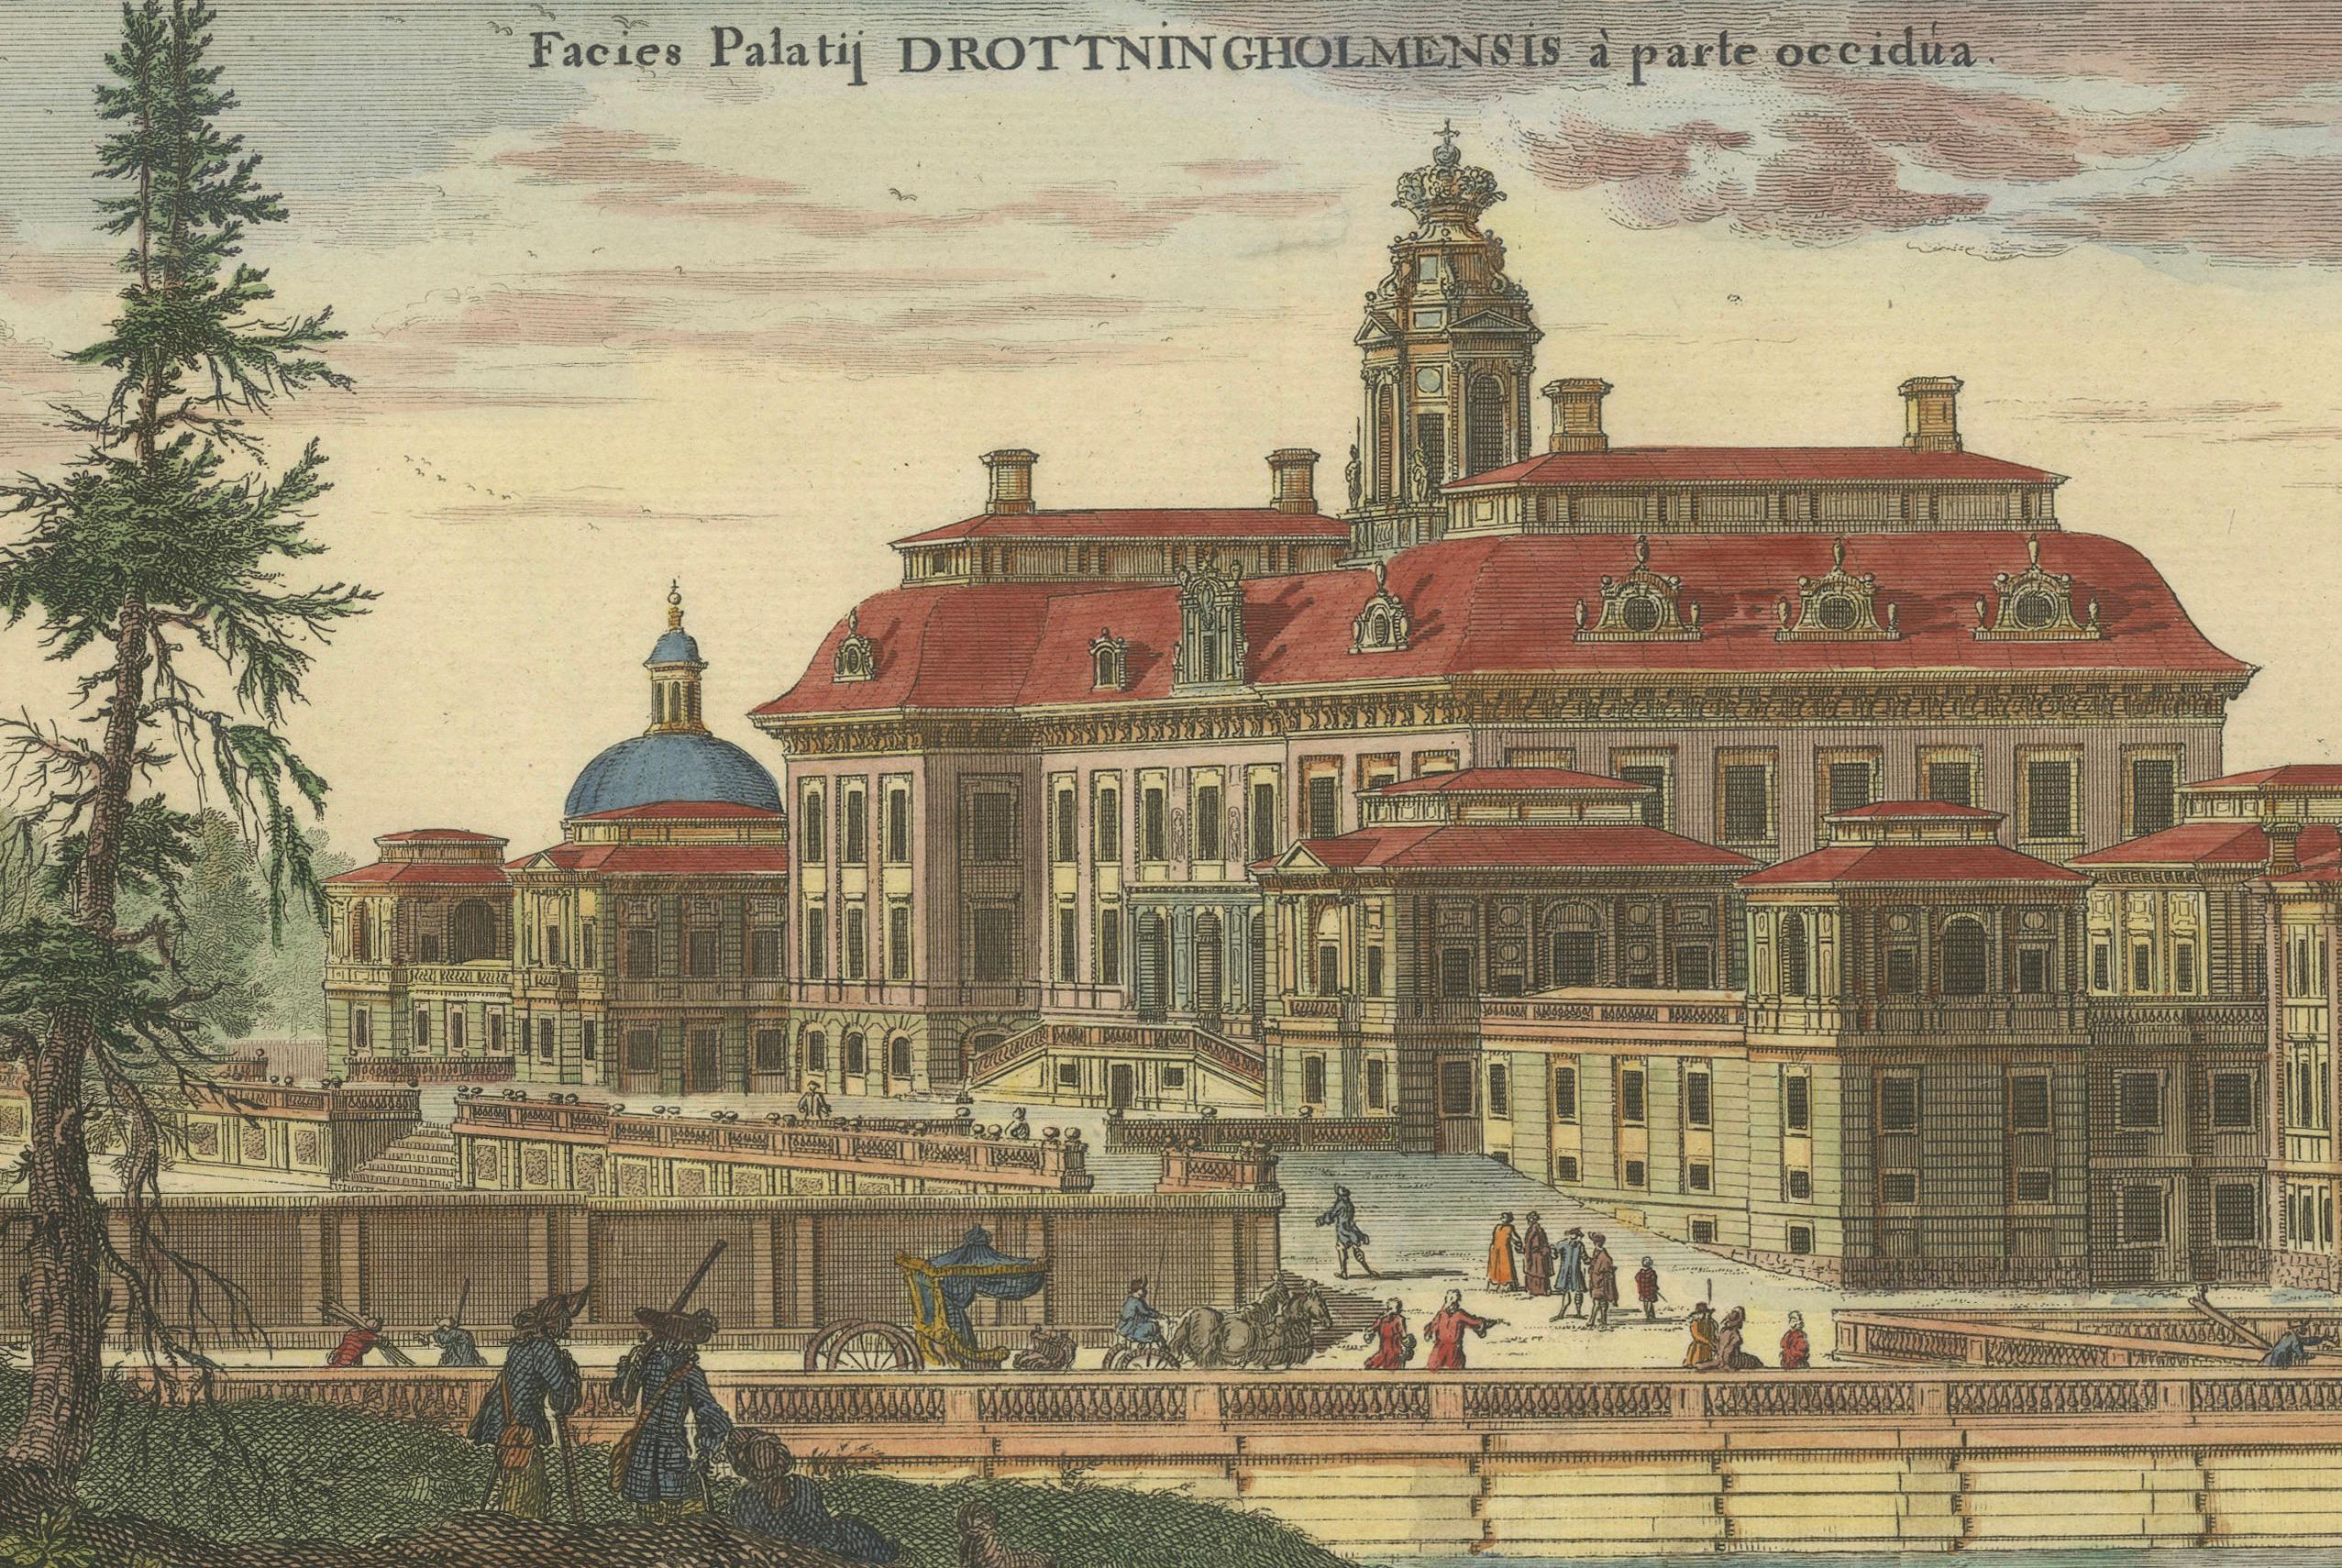 Engraved Drottningholm Palace in Sweden: East and West Views by Dahlbergh, 1707 For Sale